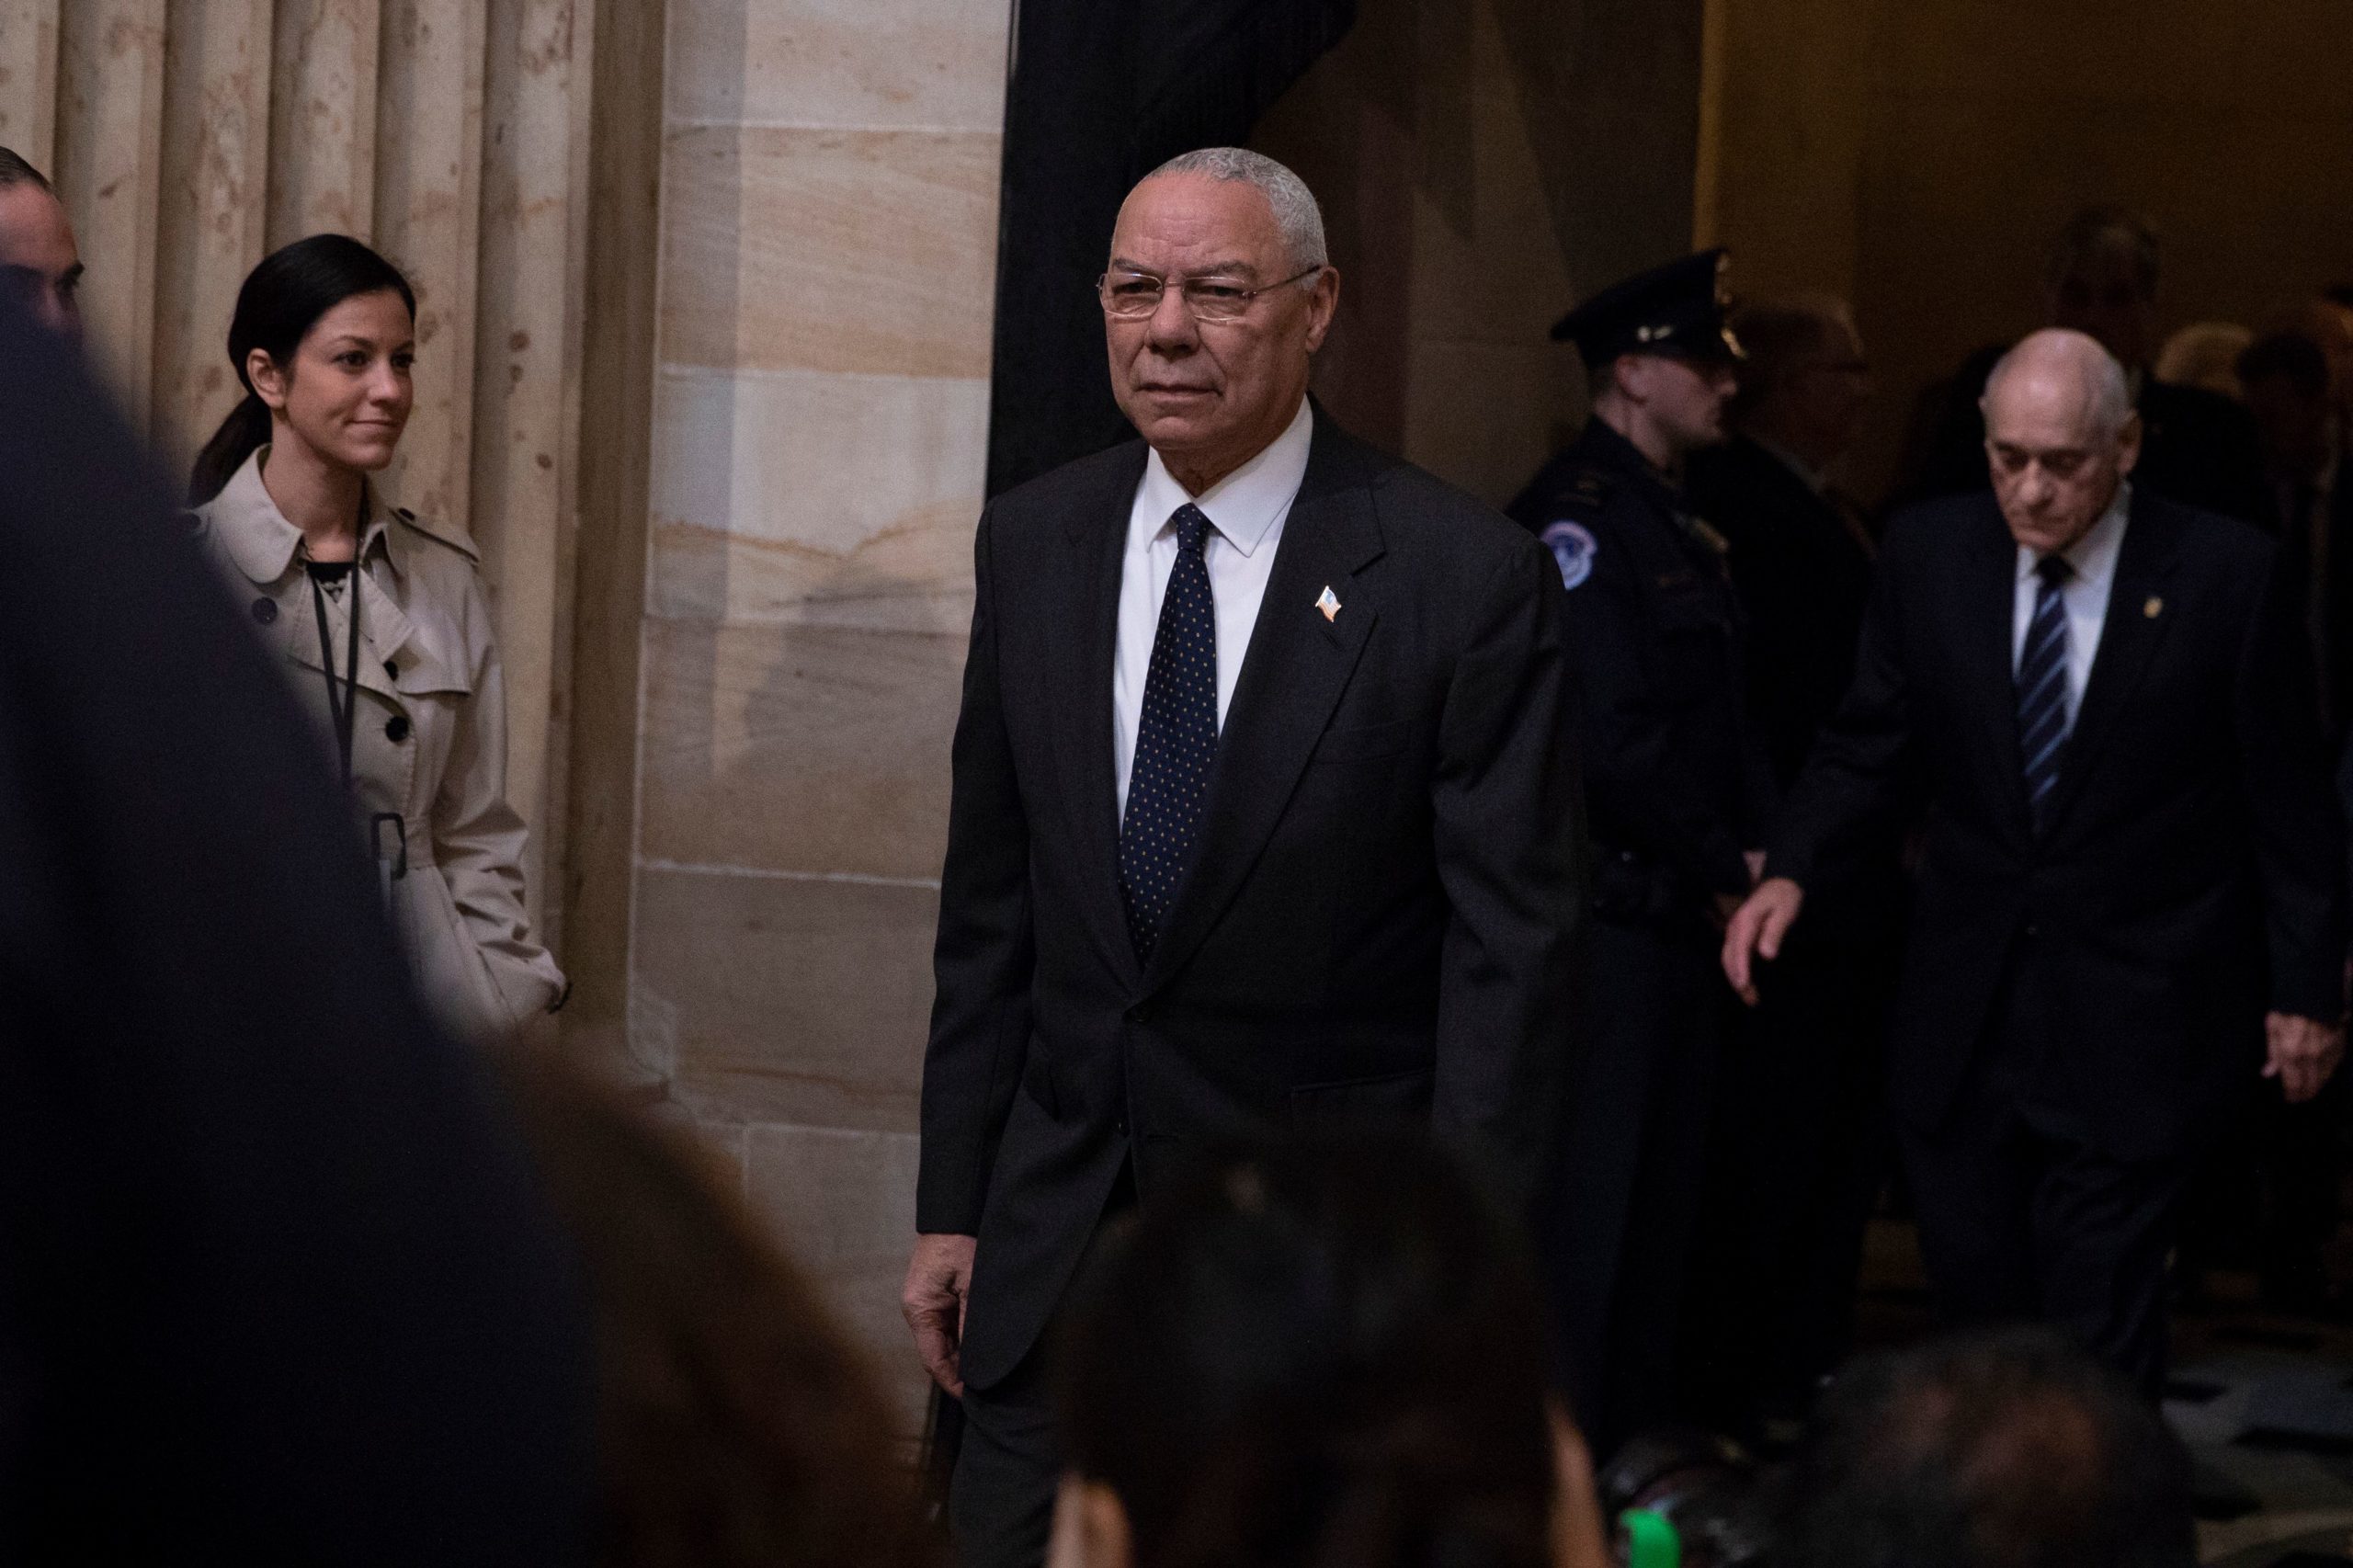 Former US Secretary of State Colin Powell arrives to pay his respects as the remains of former US President George H. W. Bush lie in state at the US Capitol rotunda December 4, 2018 in Washington, DC. - The body of the late former President George H.W. Bush travelled from Houston to Washington, where he will lie in state at the US Capitol through Wednesday morning. Bush, who died on November 30, will return to Houston for his funeral on Thursday. (ALEX EDELMAN/AFP via Getty Images)